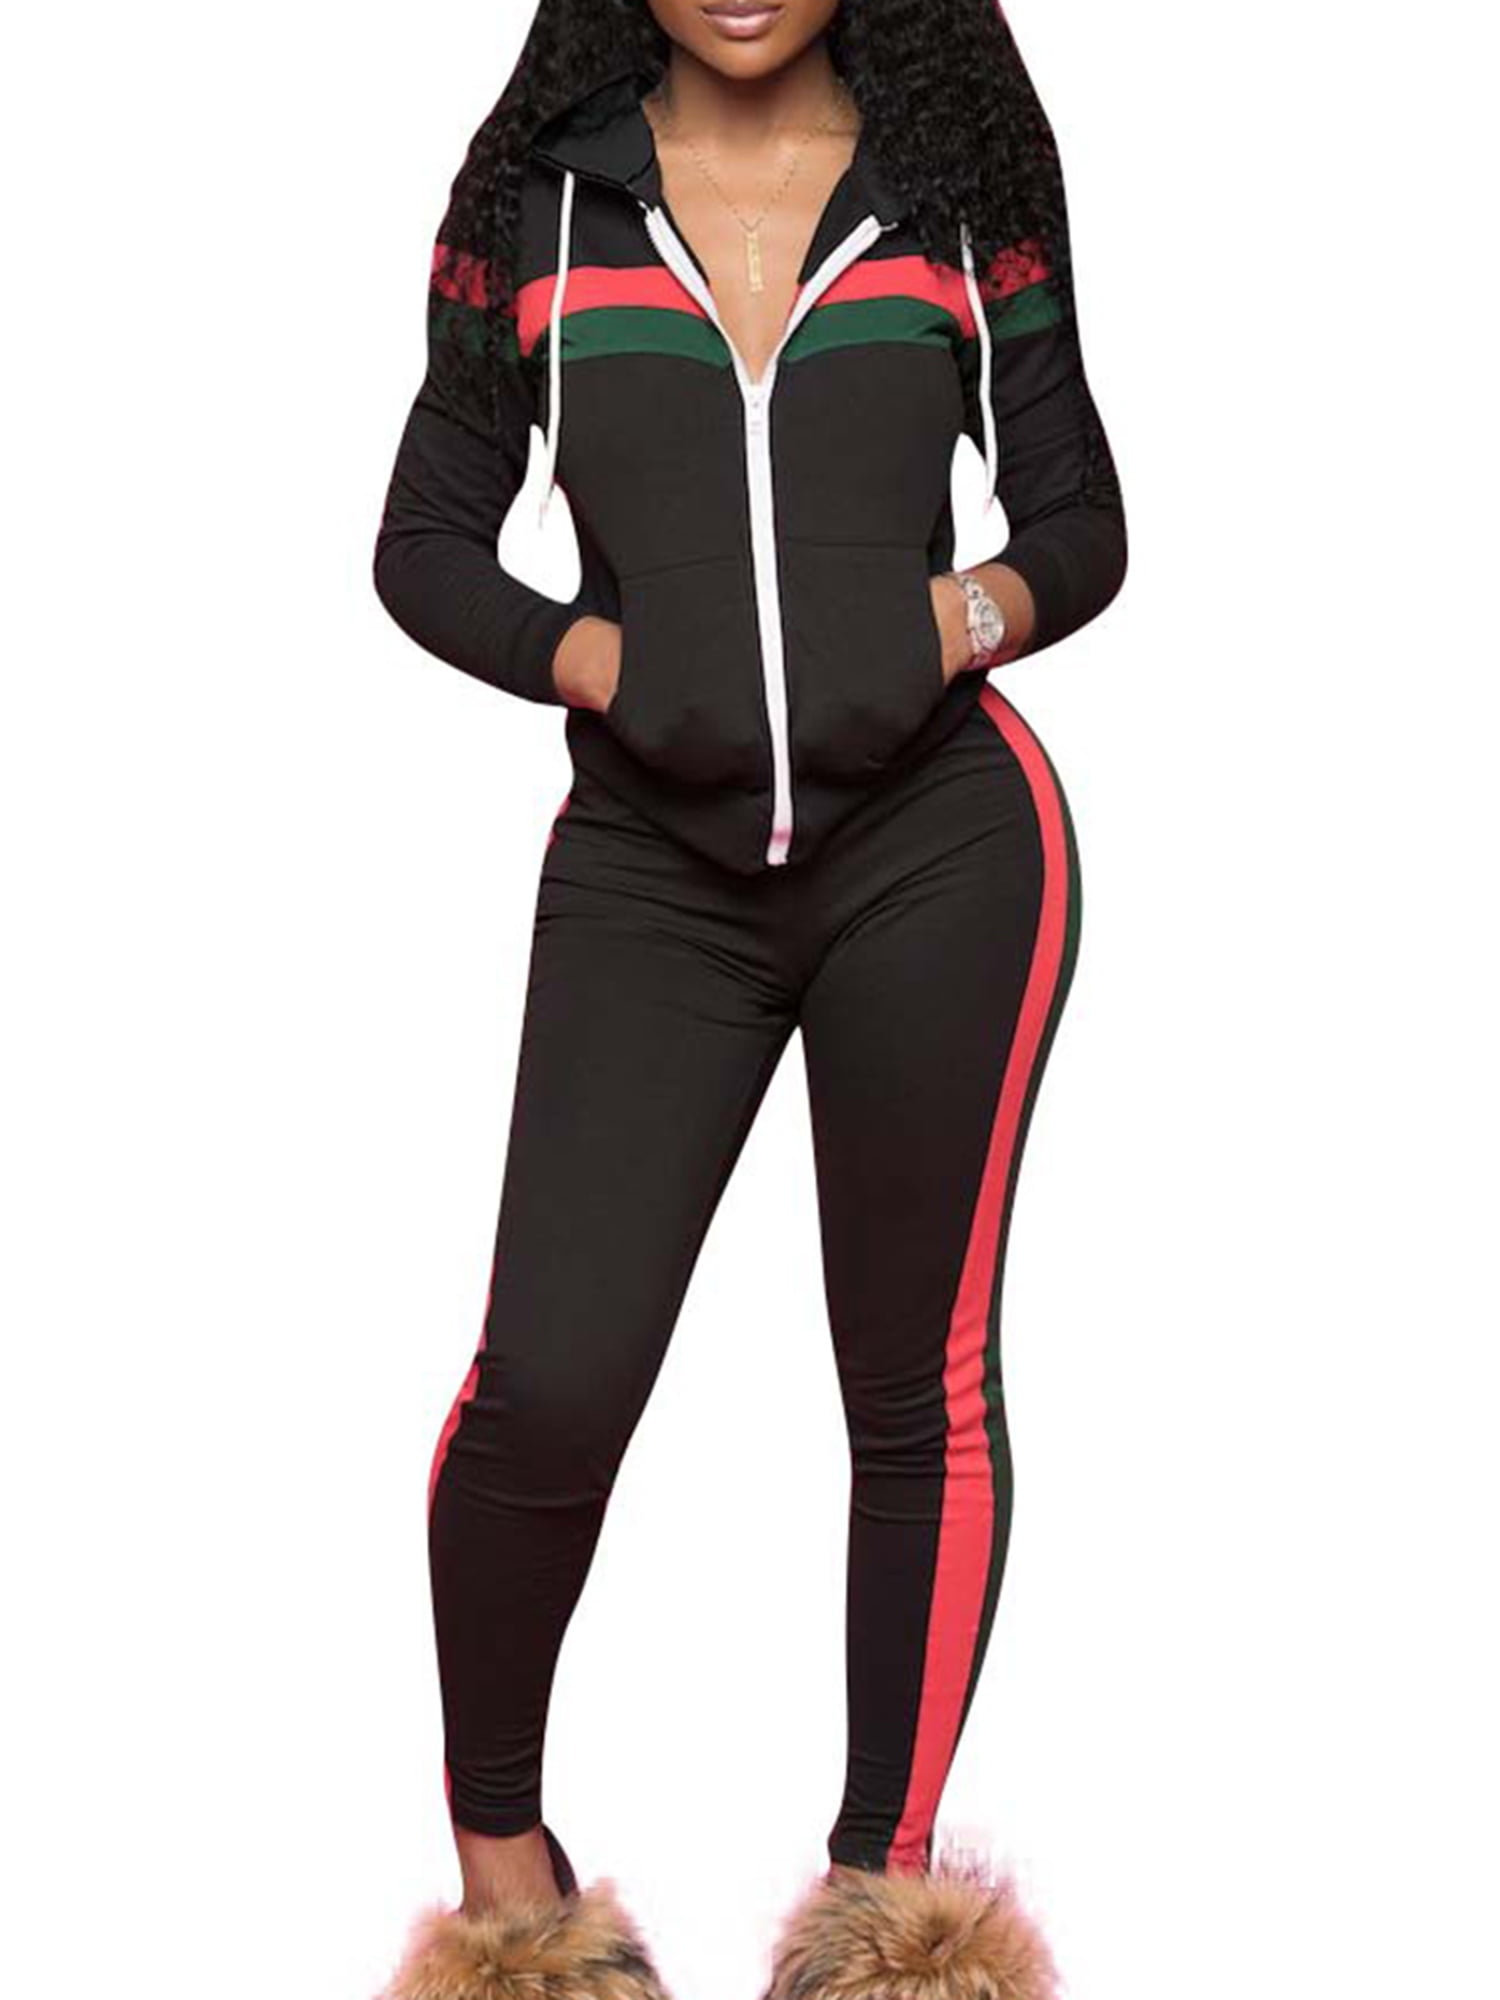 KEYIA Womens Suit Loungewear Midriff Top and Long Pant Fitness Tracksuit Set 